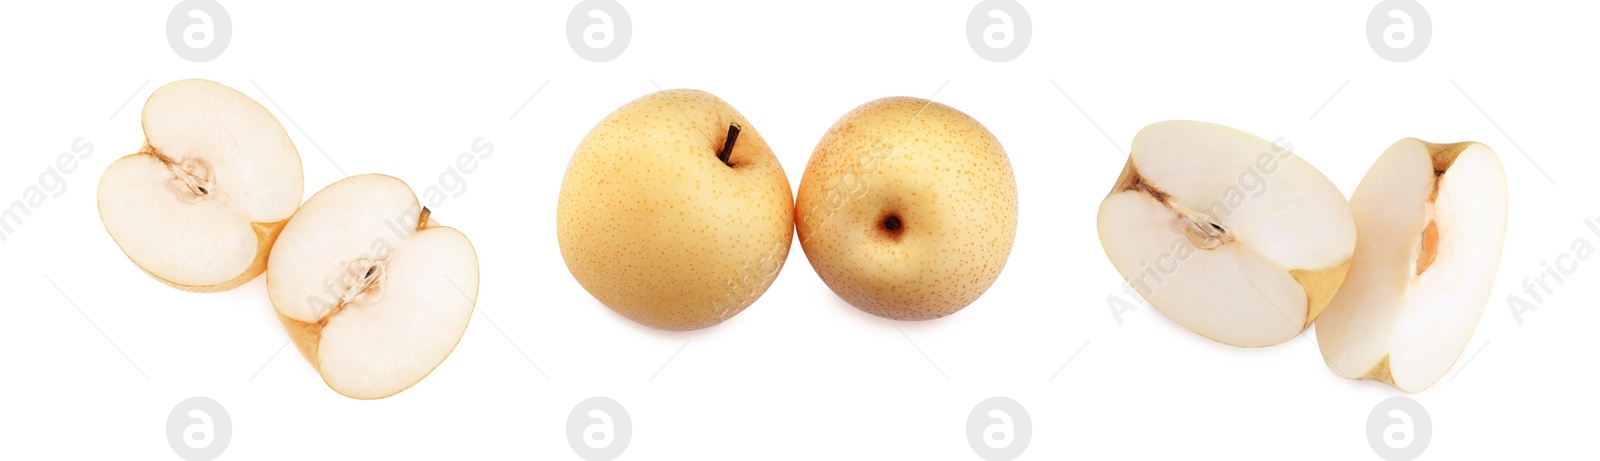 Image of Set with fresh ripe apple pears on white background, banner design 